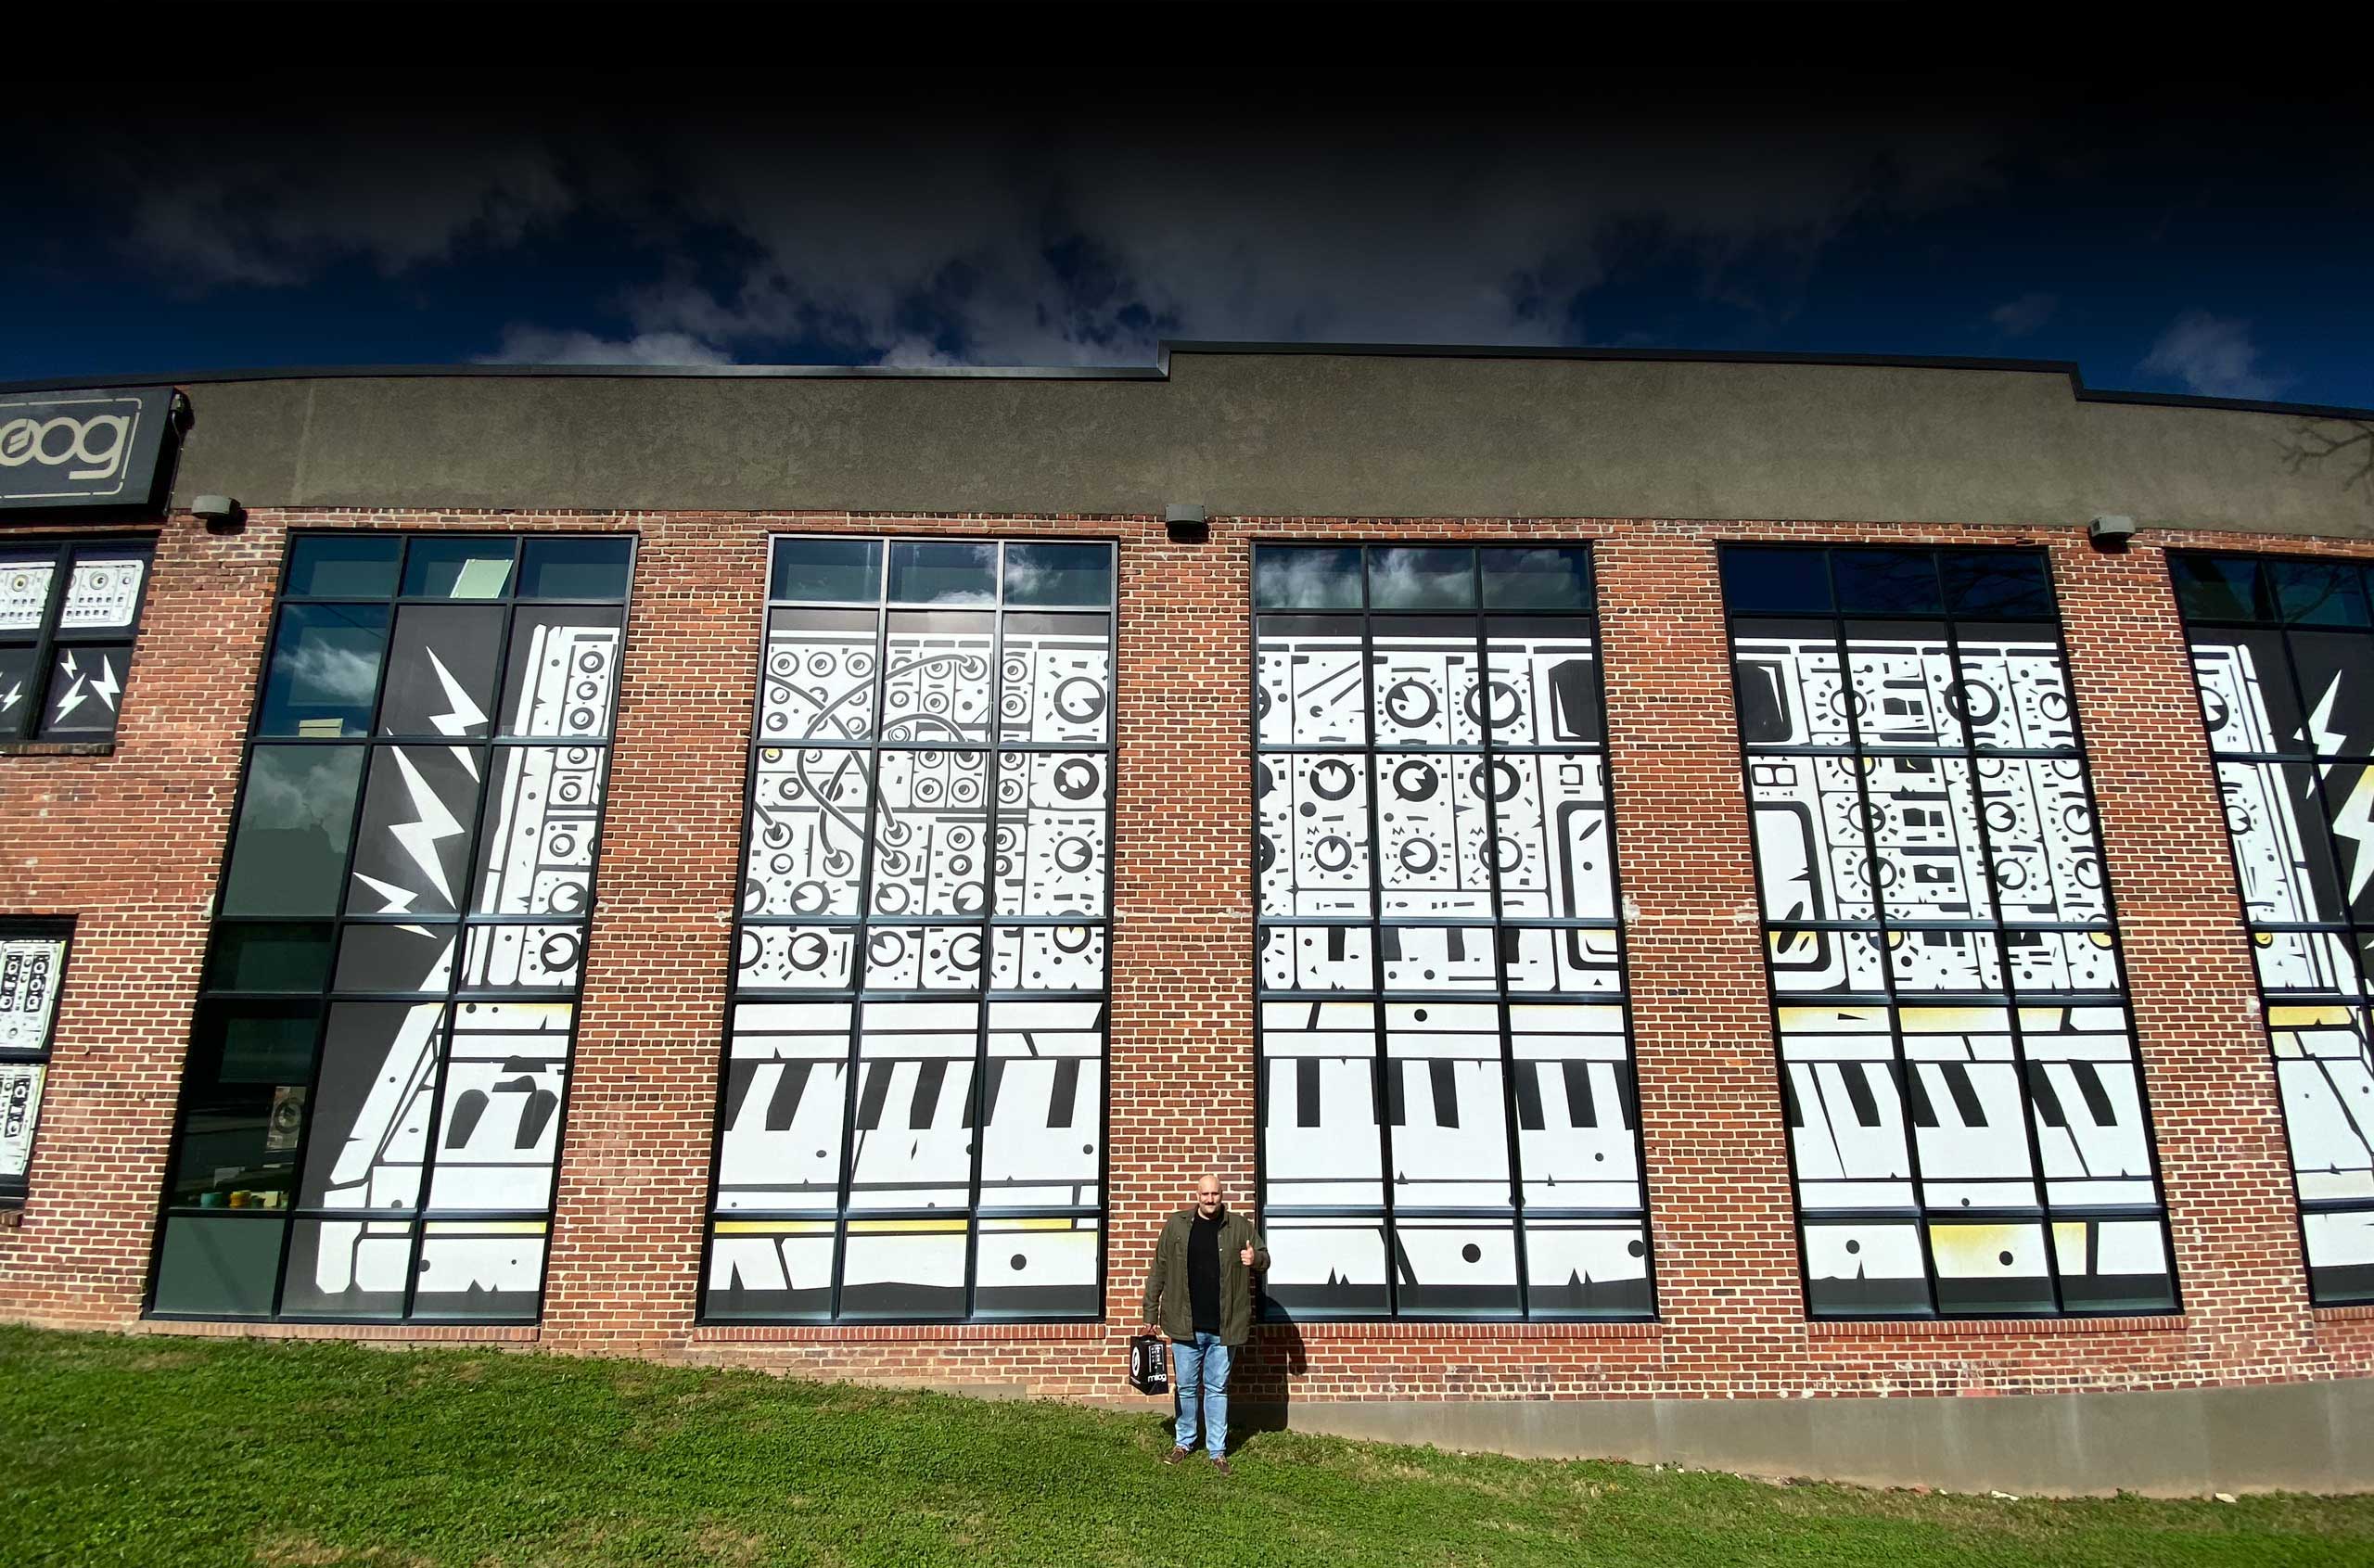 Outside the Moog factory in Asheville, NC